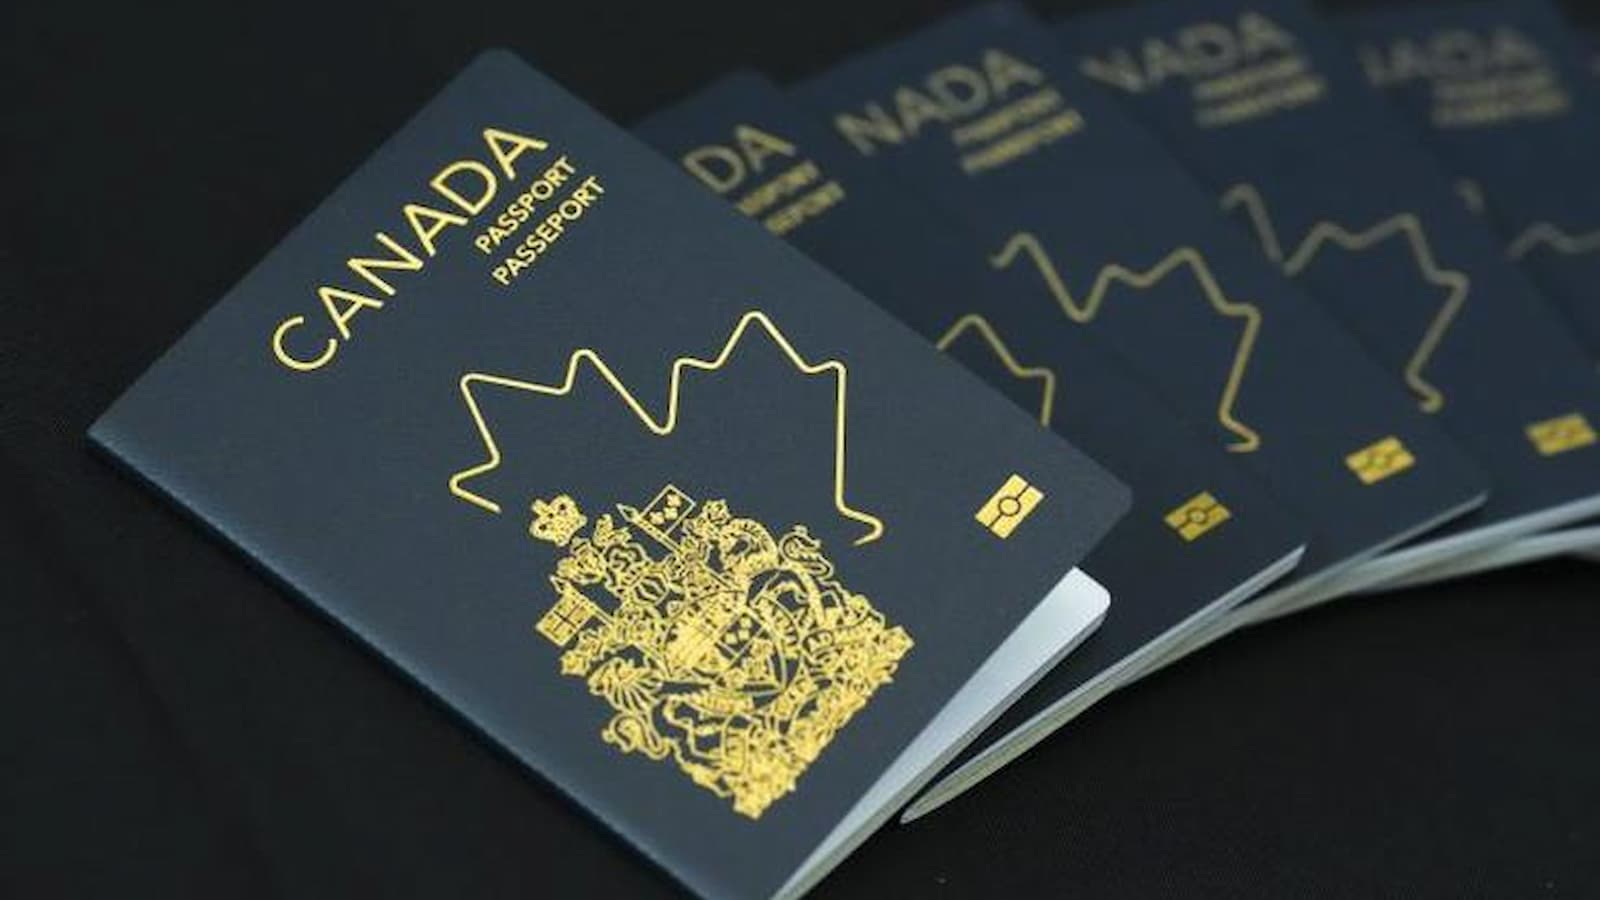 Canada Citizenship: Superior Court Ruled against a citizenship cutoff for second-generation citizens